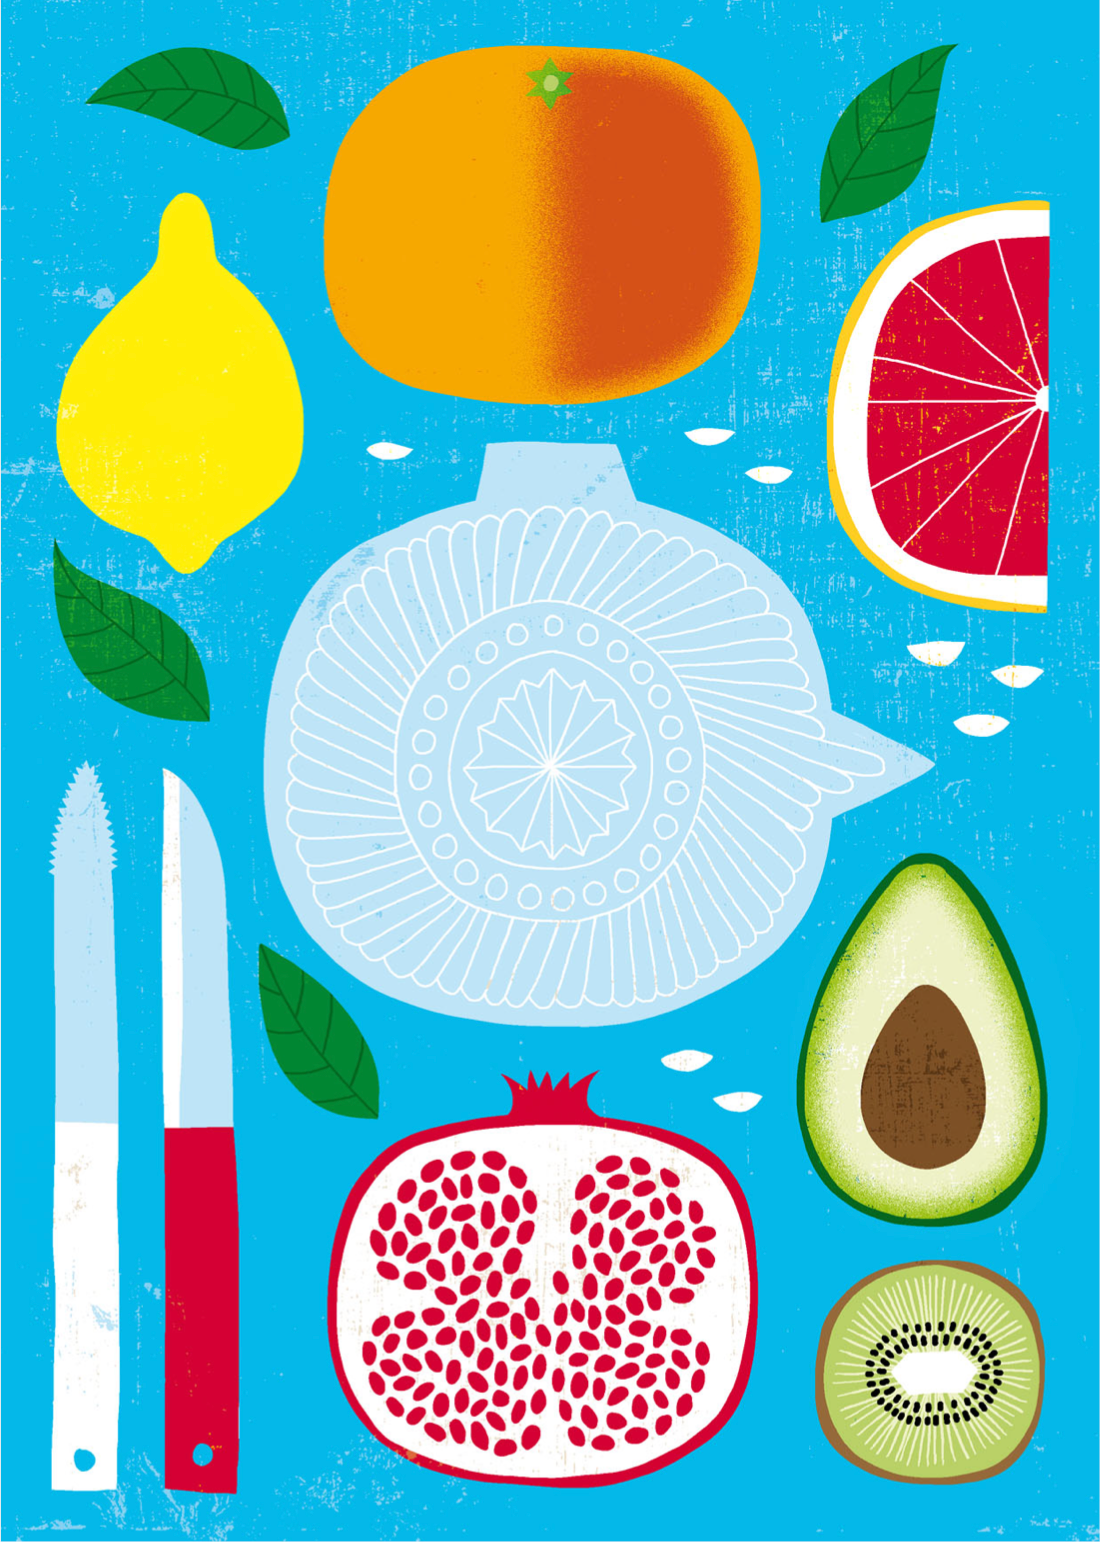 Sky blue background with bright illustrations of citrus, pomegranate, avocado and knives.